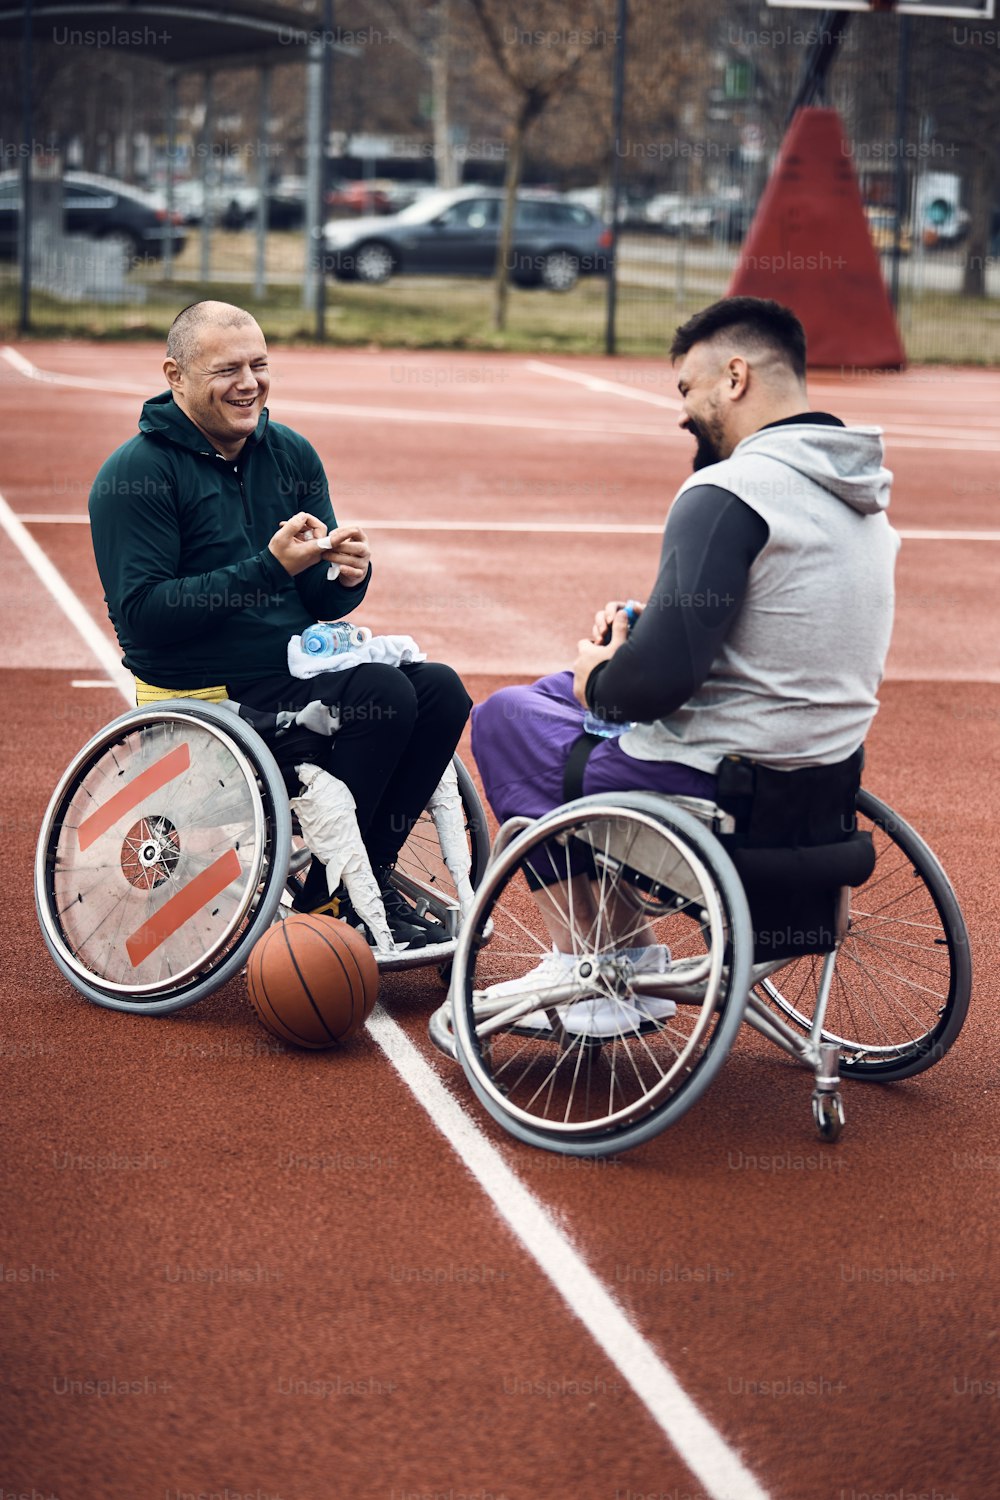 Cheerful basketball players in wheelchairs having fun while preparing for practice on an outdoor sports court.